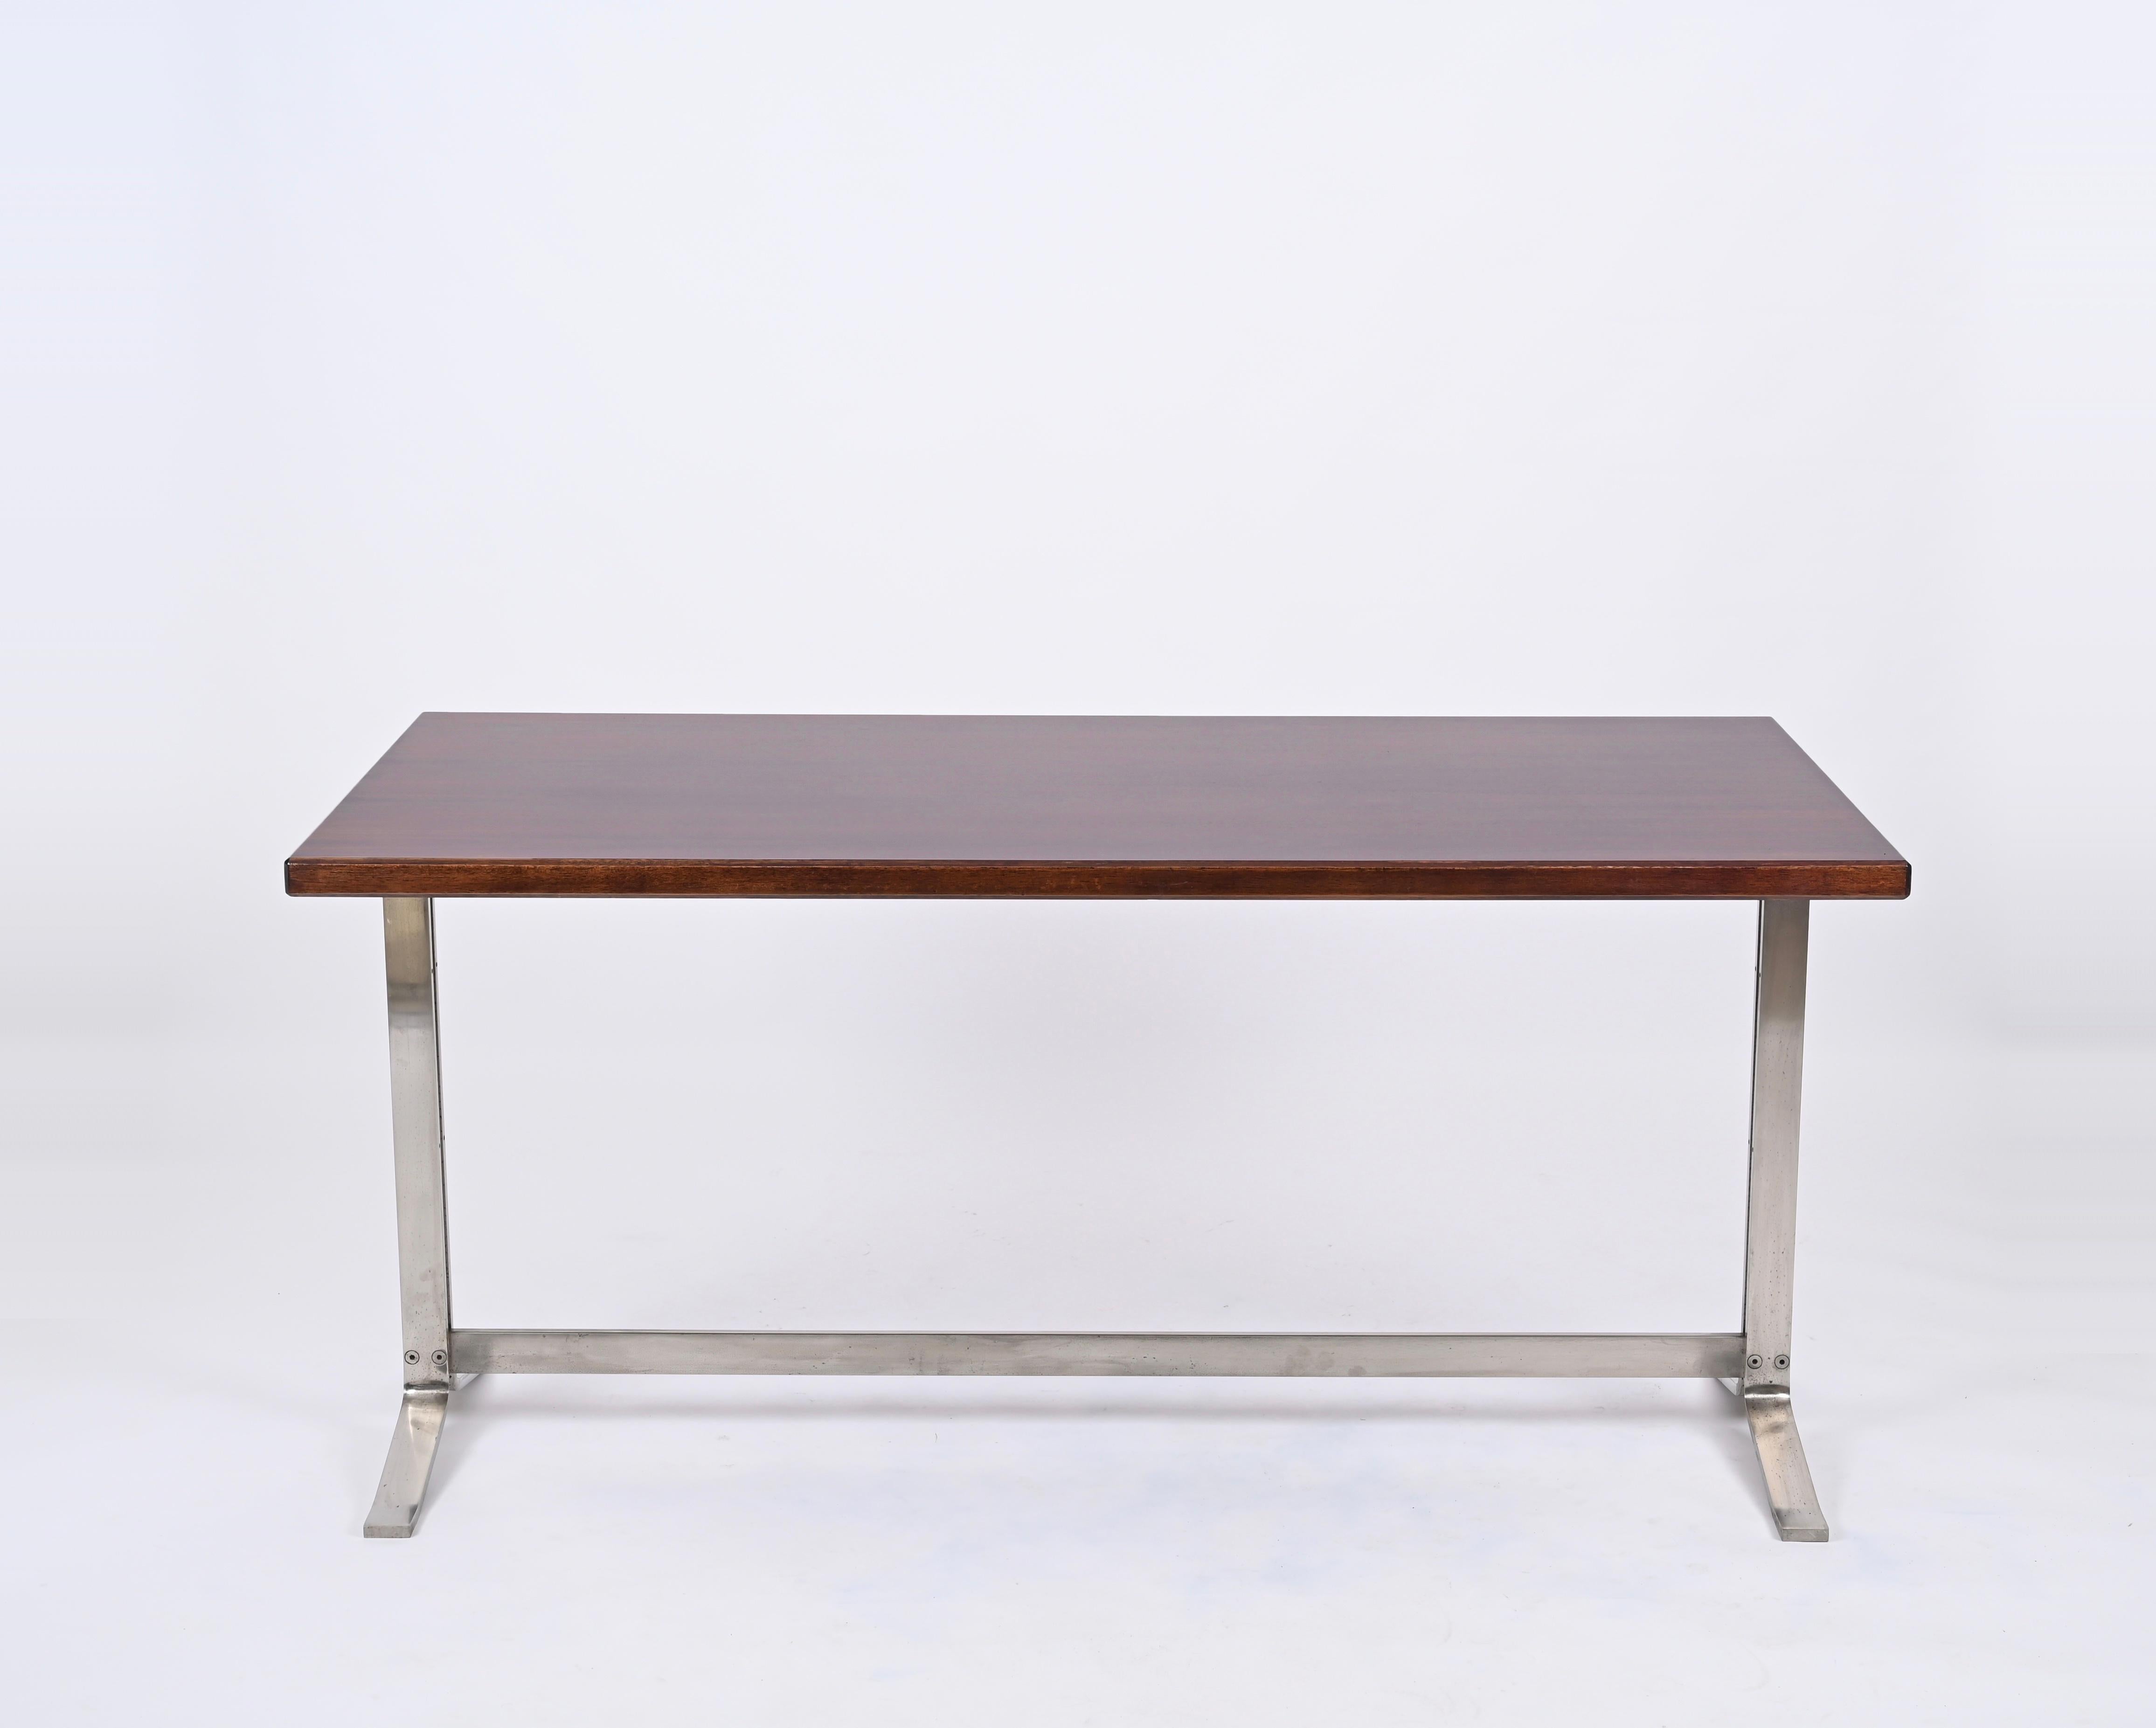 Italian Midcentury Desk in Walnut and Steel by Moscatelli for Formanova, Italy, 1965 For Sale